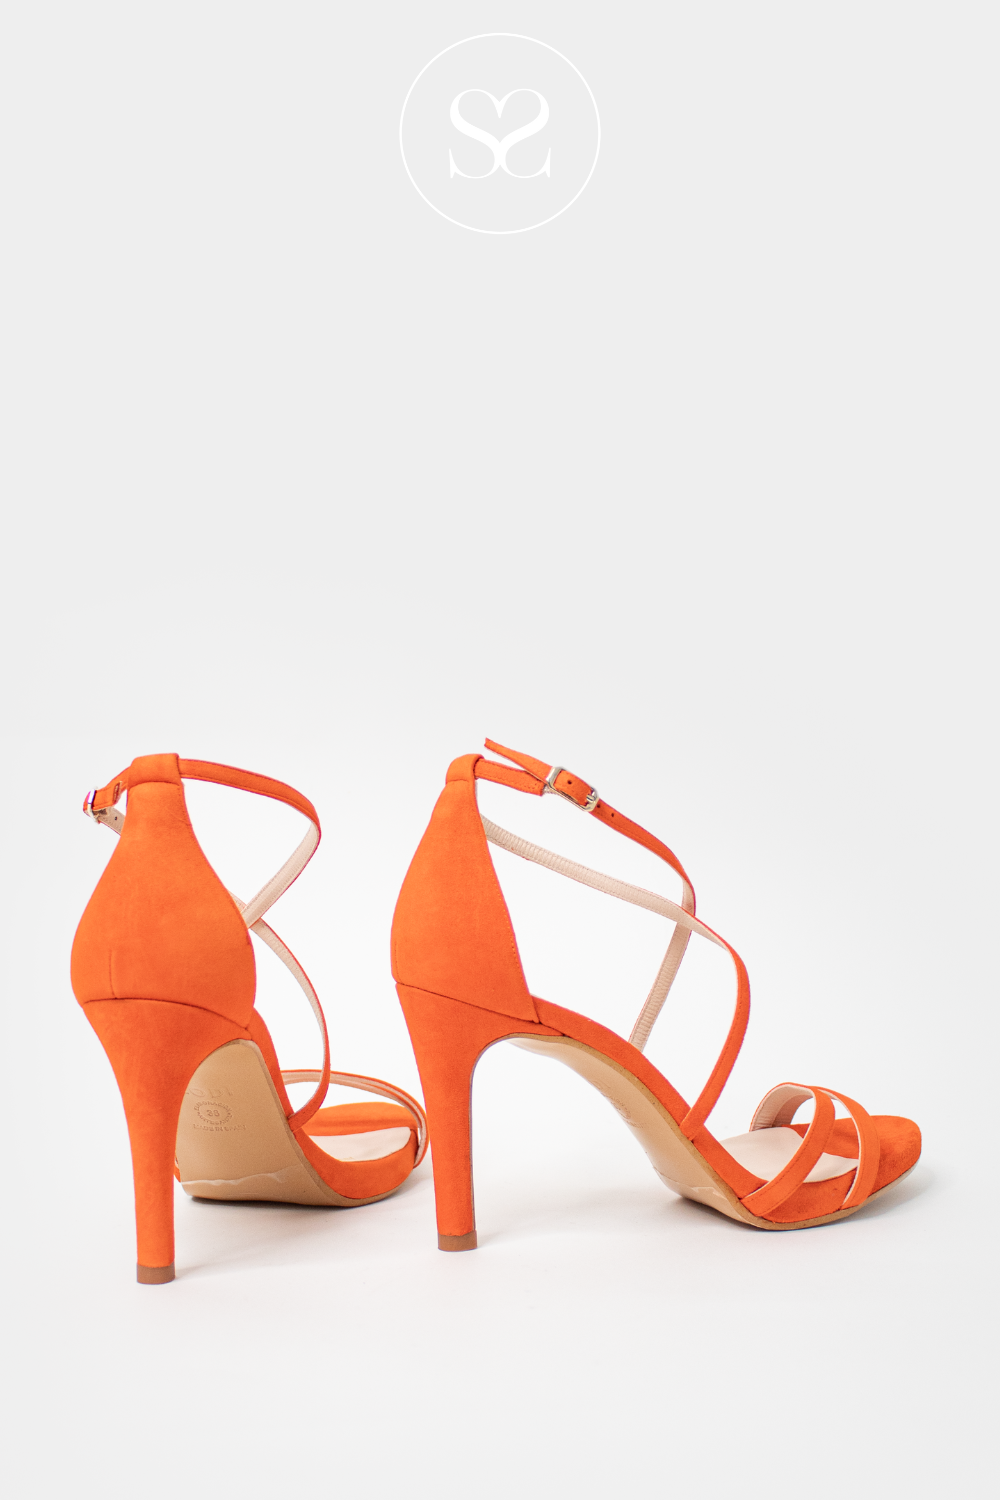 LODI INRIKO ORANGE SUEDE CRISS CROSS STRAPPY HIGH HEEL SANDALS WITH ADJUSTABLE ANKLE STRAP